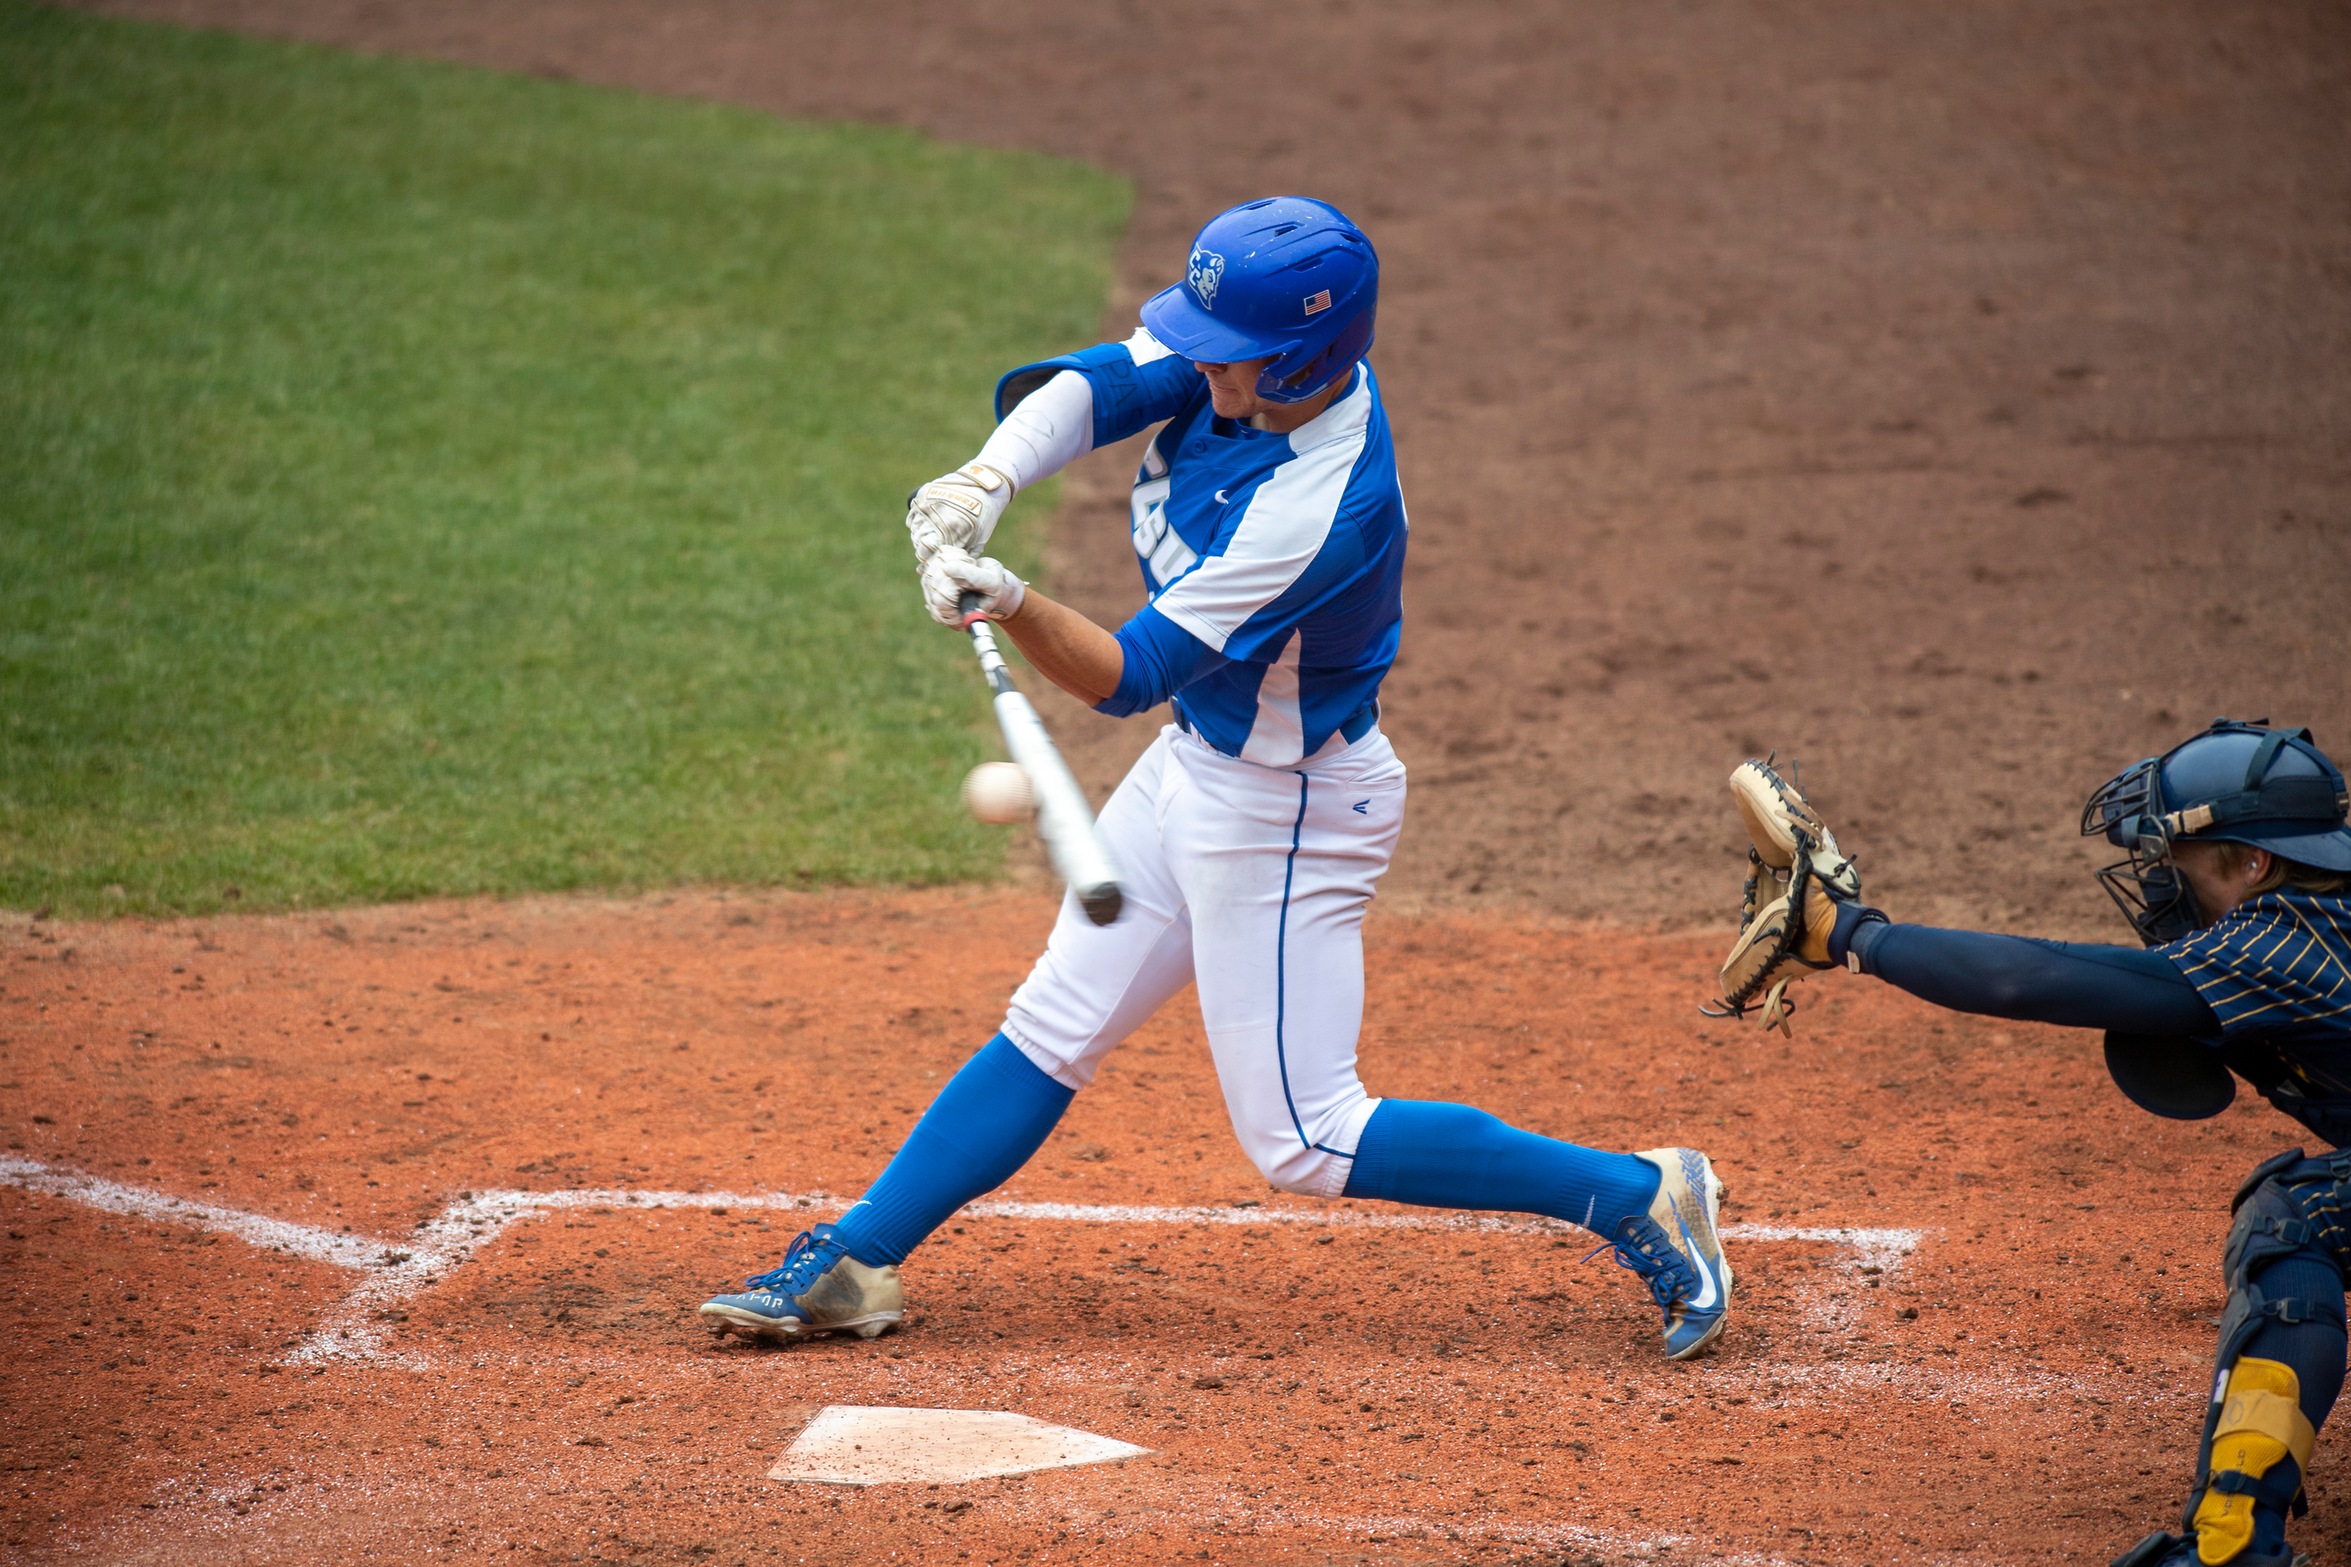 Hunter Pasqualini had four hits and drove in five runs on Sunday. (Steve McLaughlin Photography)